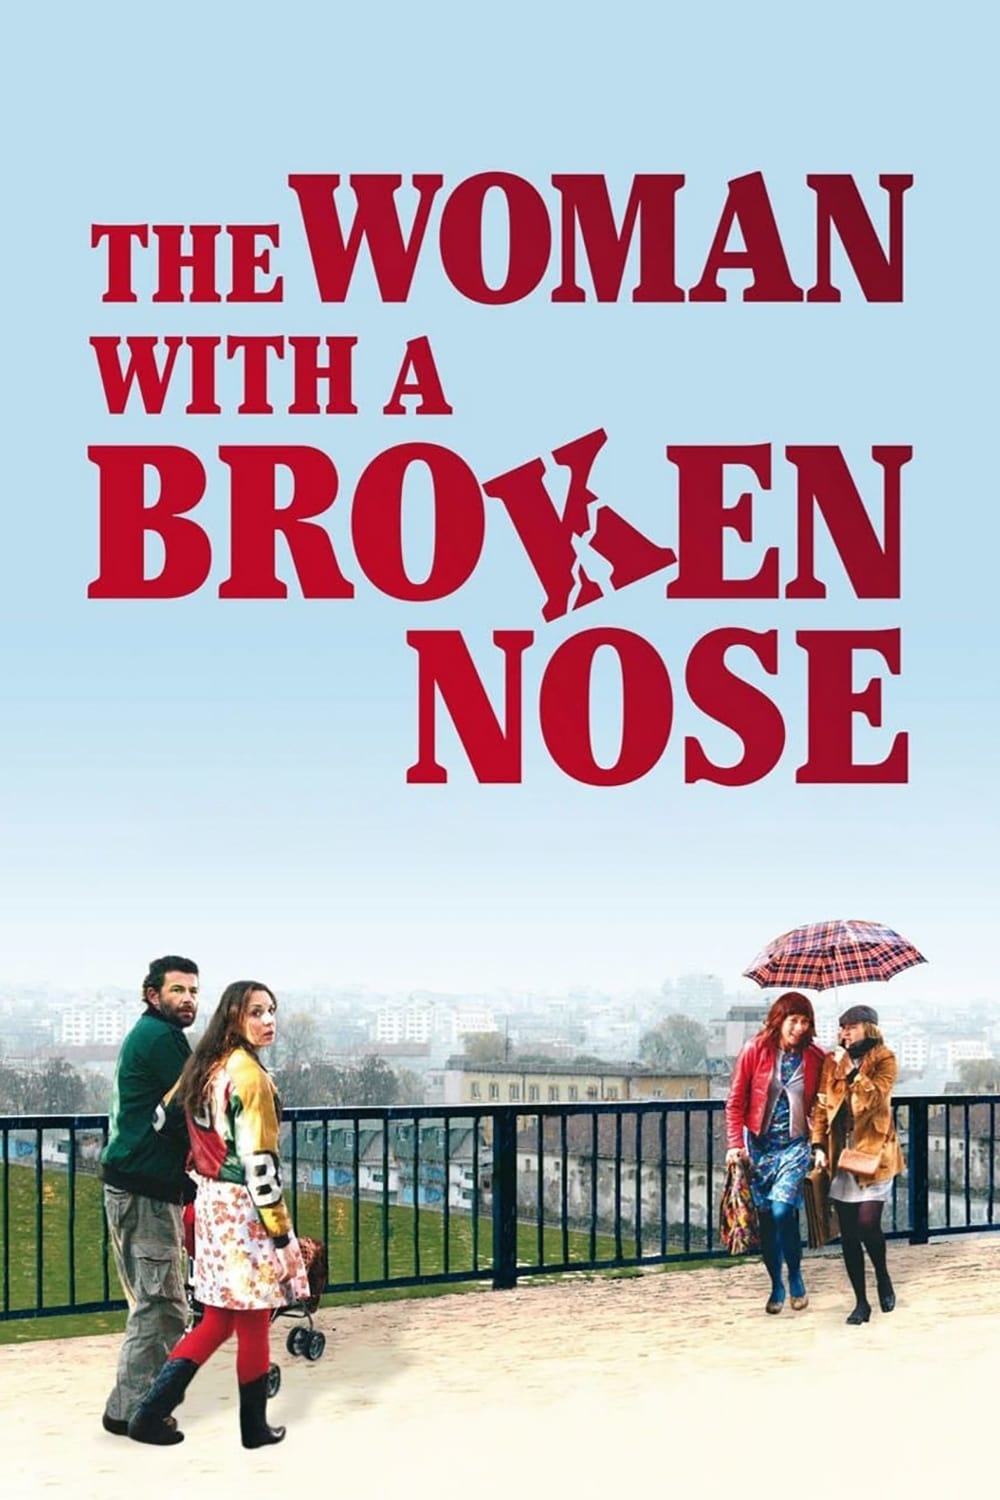 The Woman with a Broken Nose (2010)